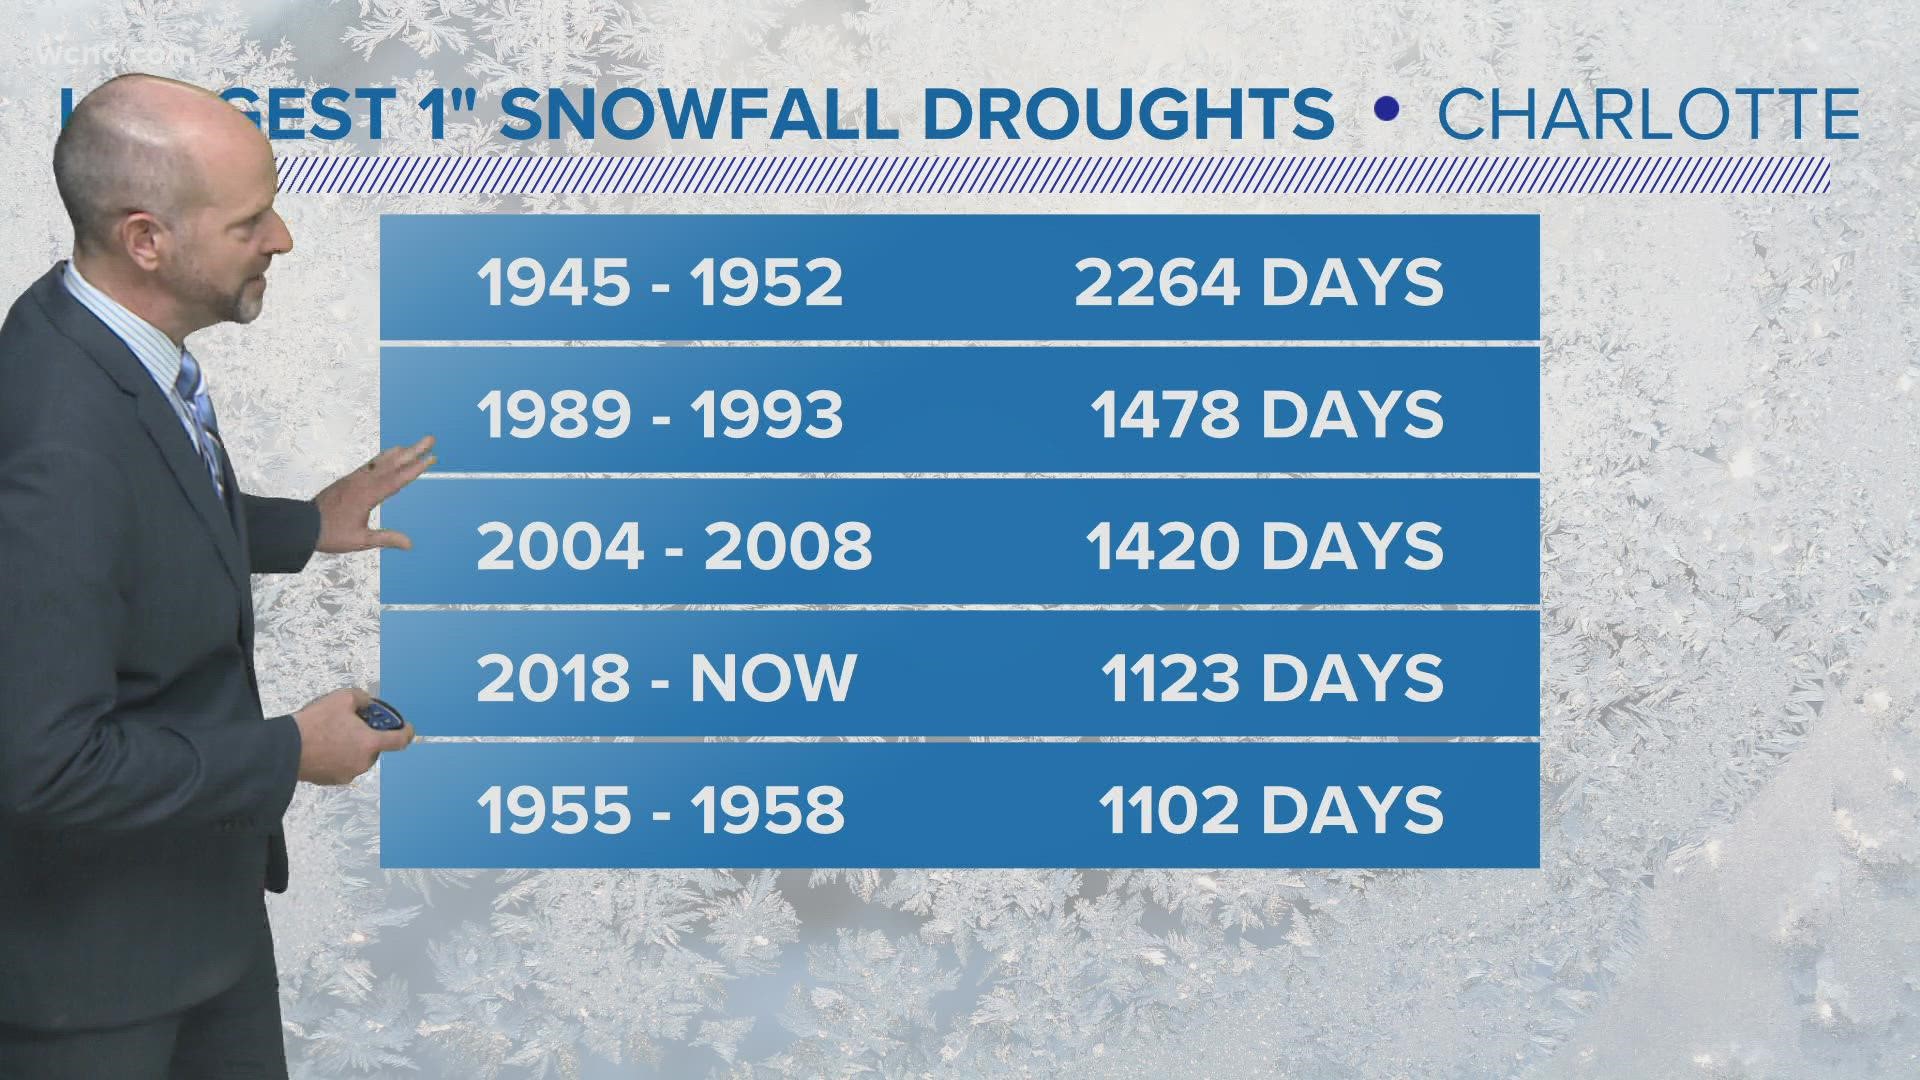 Snowfall has been a luxury in Charlotte over the past decade. Even rainfall lately has been hard to find.